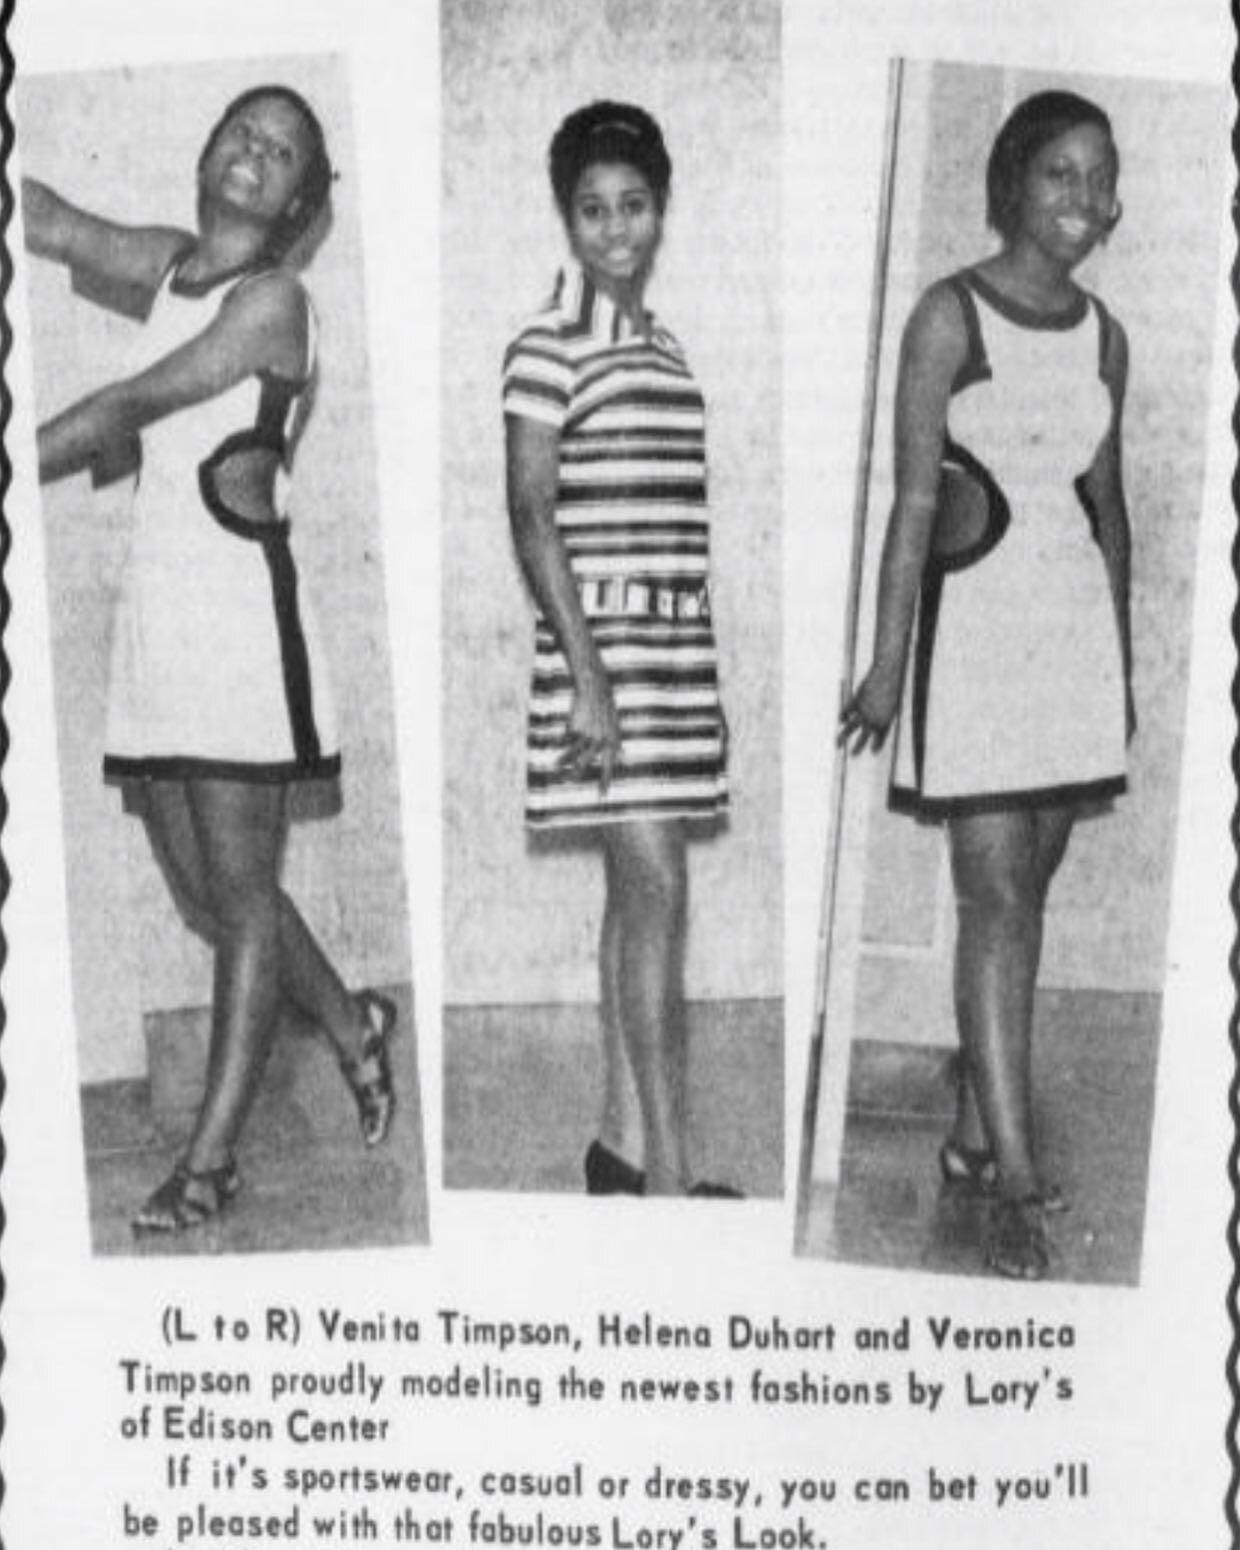 Some looks from Lory&rsquo;s Fashion Shop circa 1968.

Lory&rsquo;s was a fashion boutique located in the Edison Plaza on 61st Street and NW 7th Avenue in Liberty City.

Mod mini dresses and A-line dresses were the fashion must haves of the time.

#b